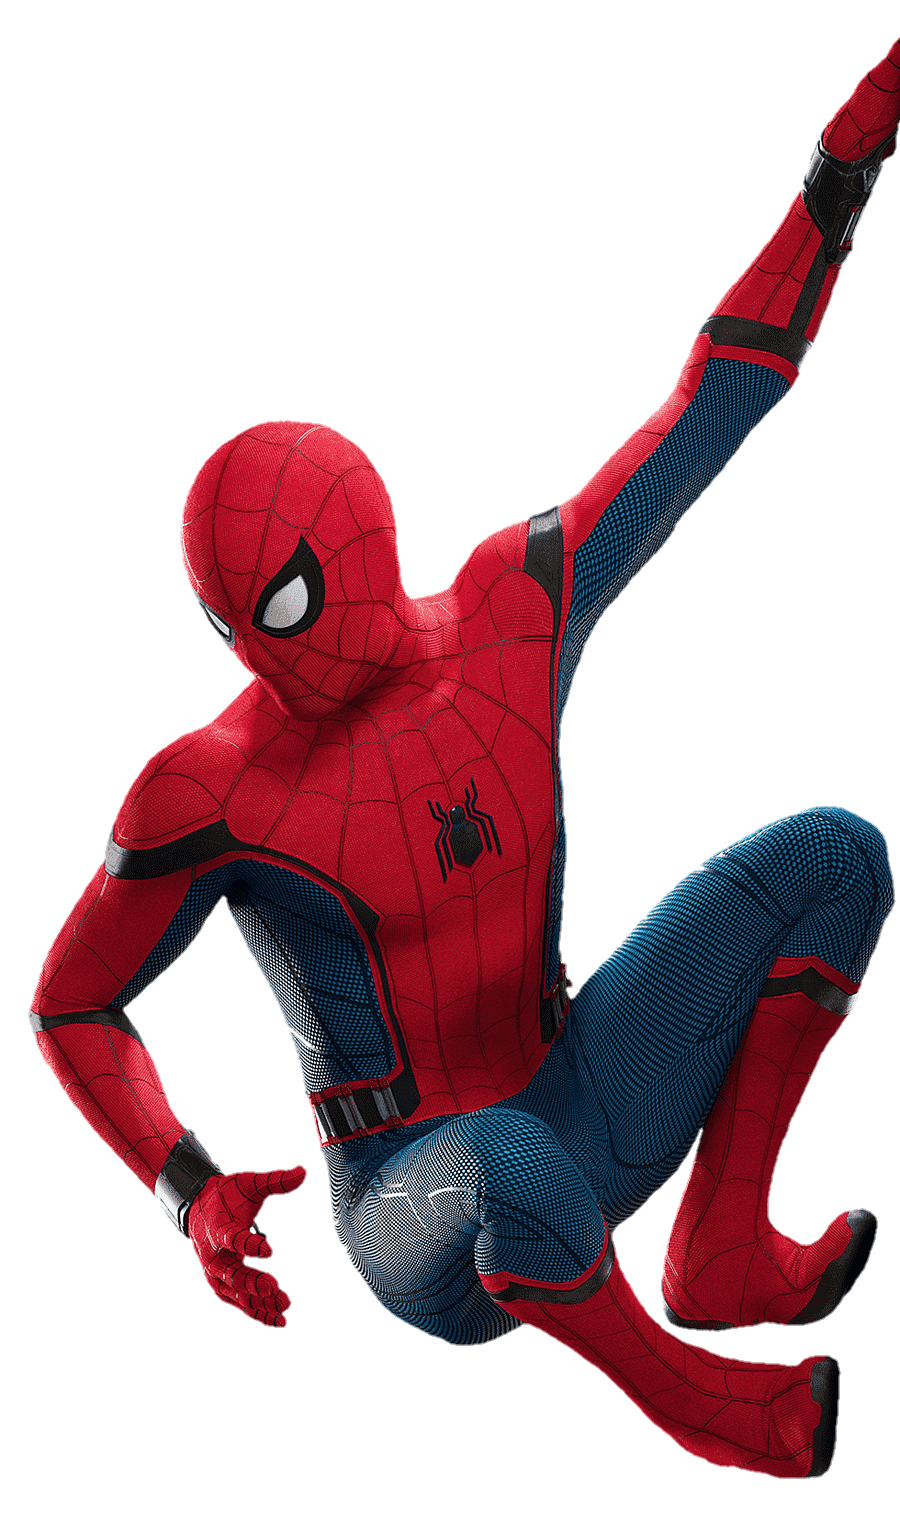 spider-man-pngfre-23